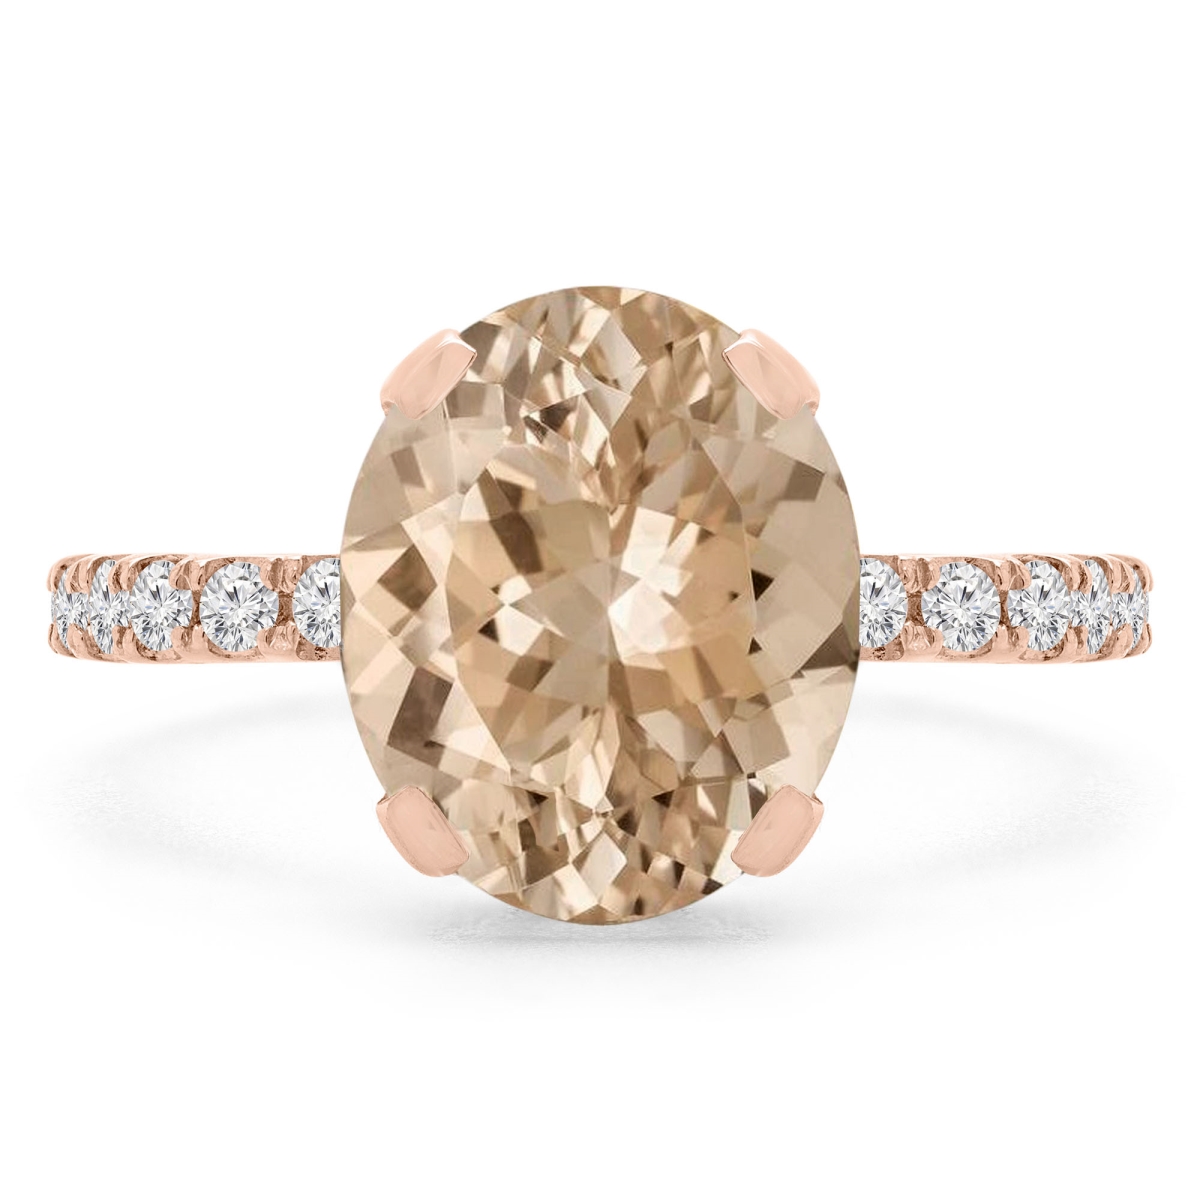 Picture of Majesty Diamonds MD190407-5.75 3.4 CTW Oval Pink Morganite Under Halo Engagement Ring in 14K Rose Gold - Size 5.75